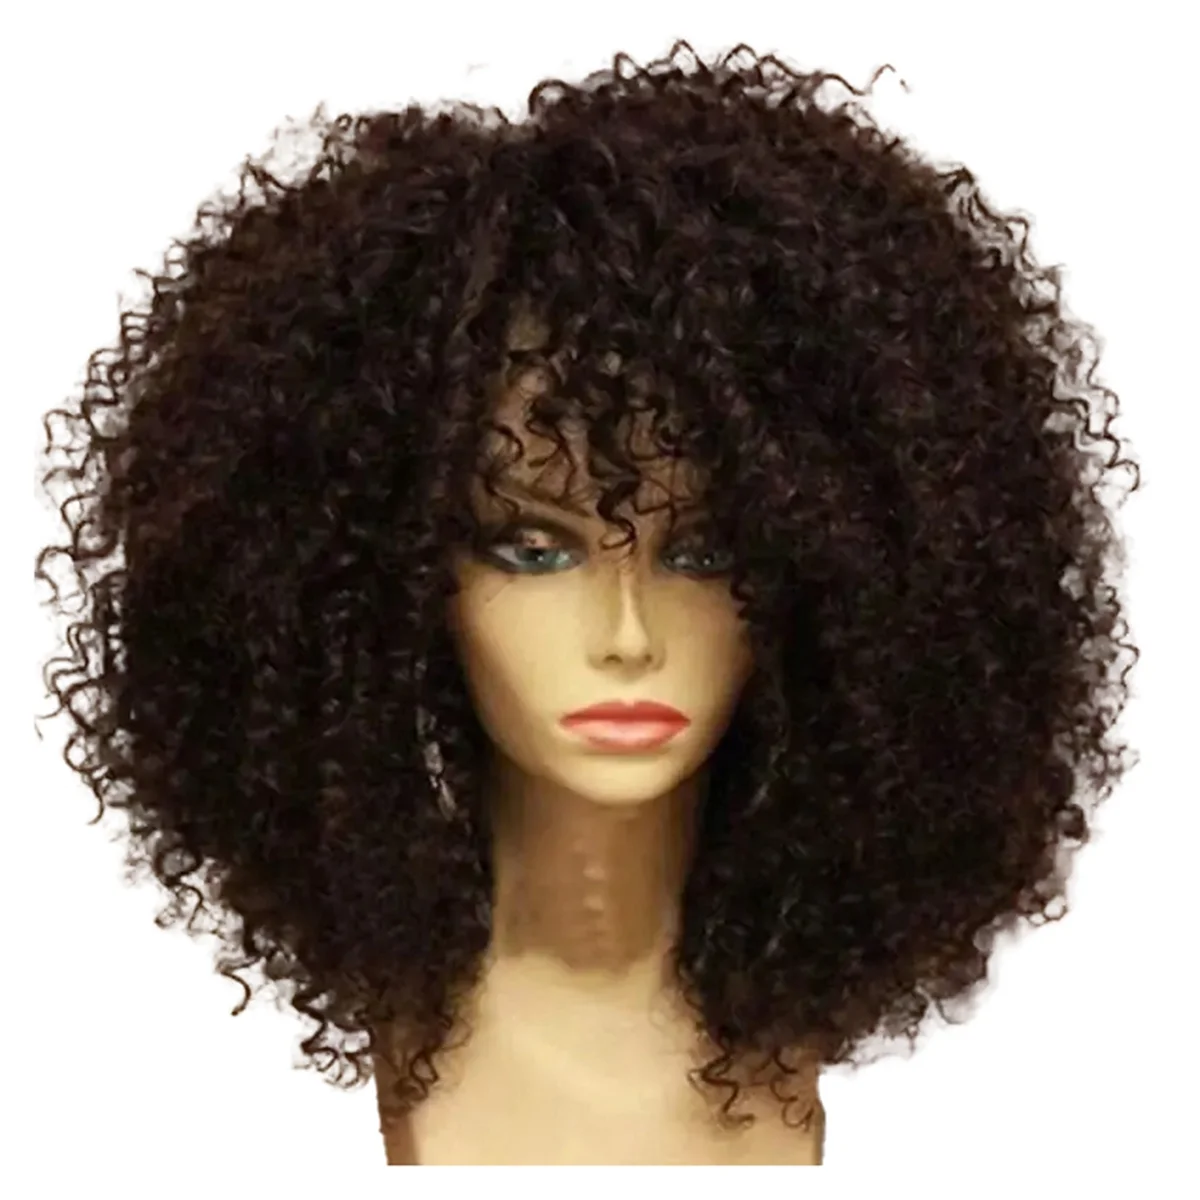 16 Inch for Afro Kinky Curly Hair Wigs with Bangs Soft Fluffy Synthetic Fiber None Lace Wigs for Party Cosplay(A)